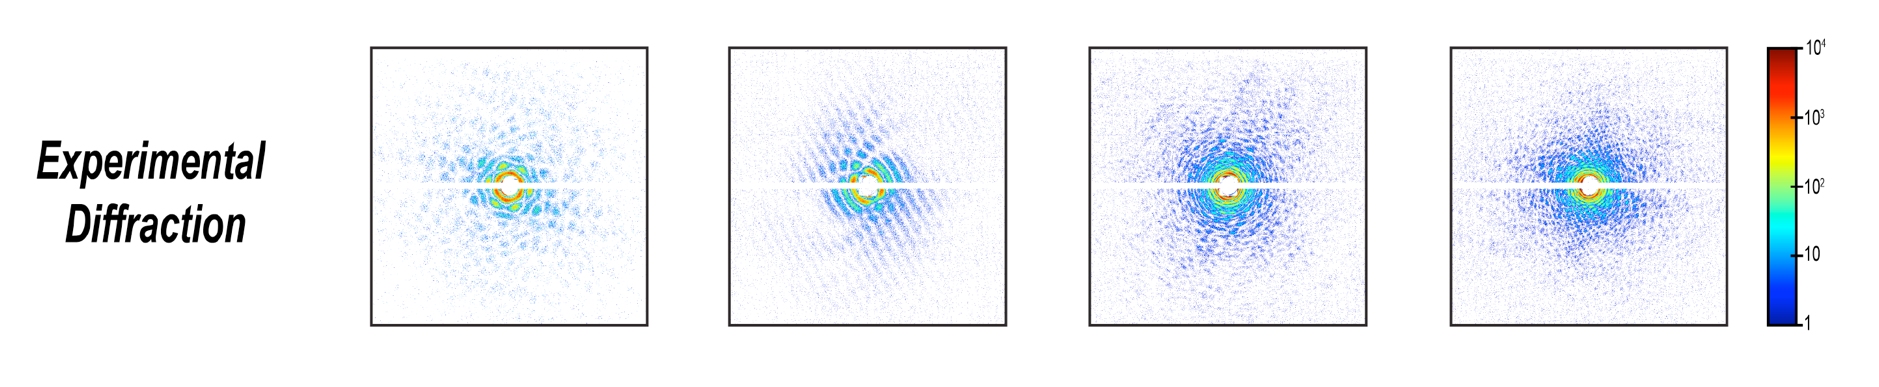 Fig. 2 Experimental diffraction image of xenon-doped superfluid helium droplets (radius 100-300 nm).